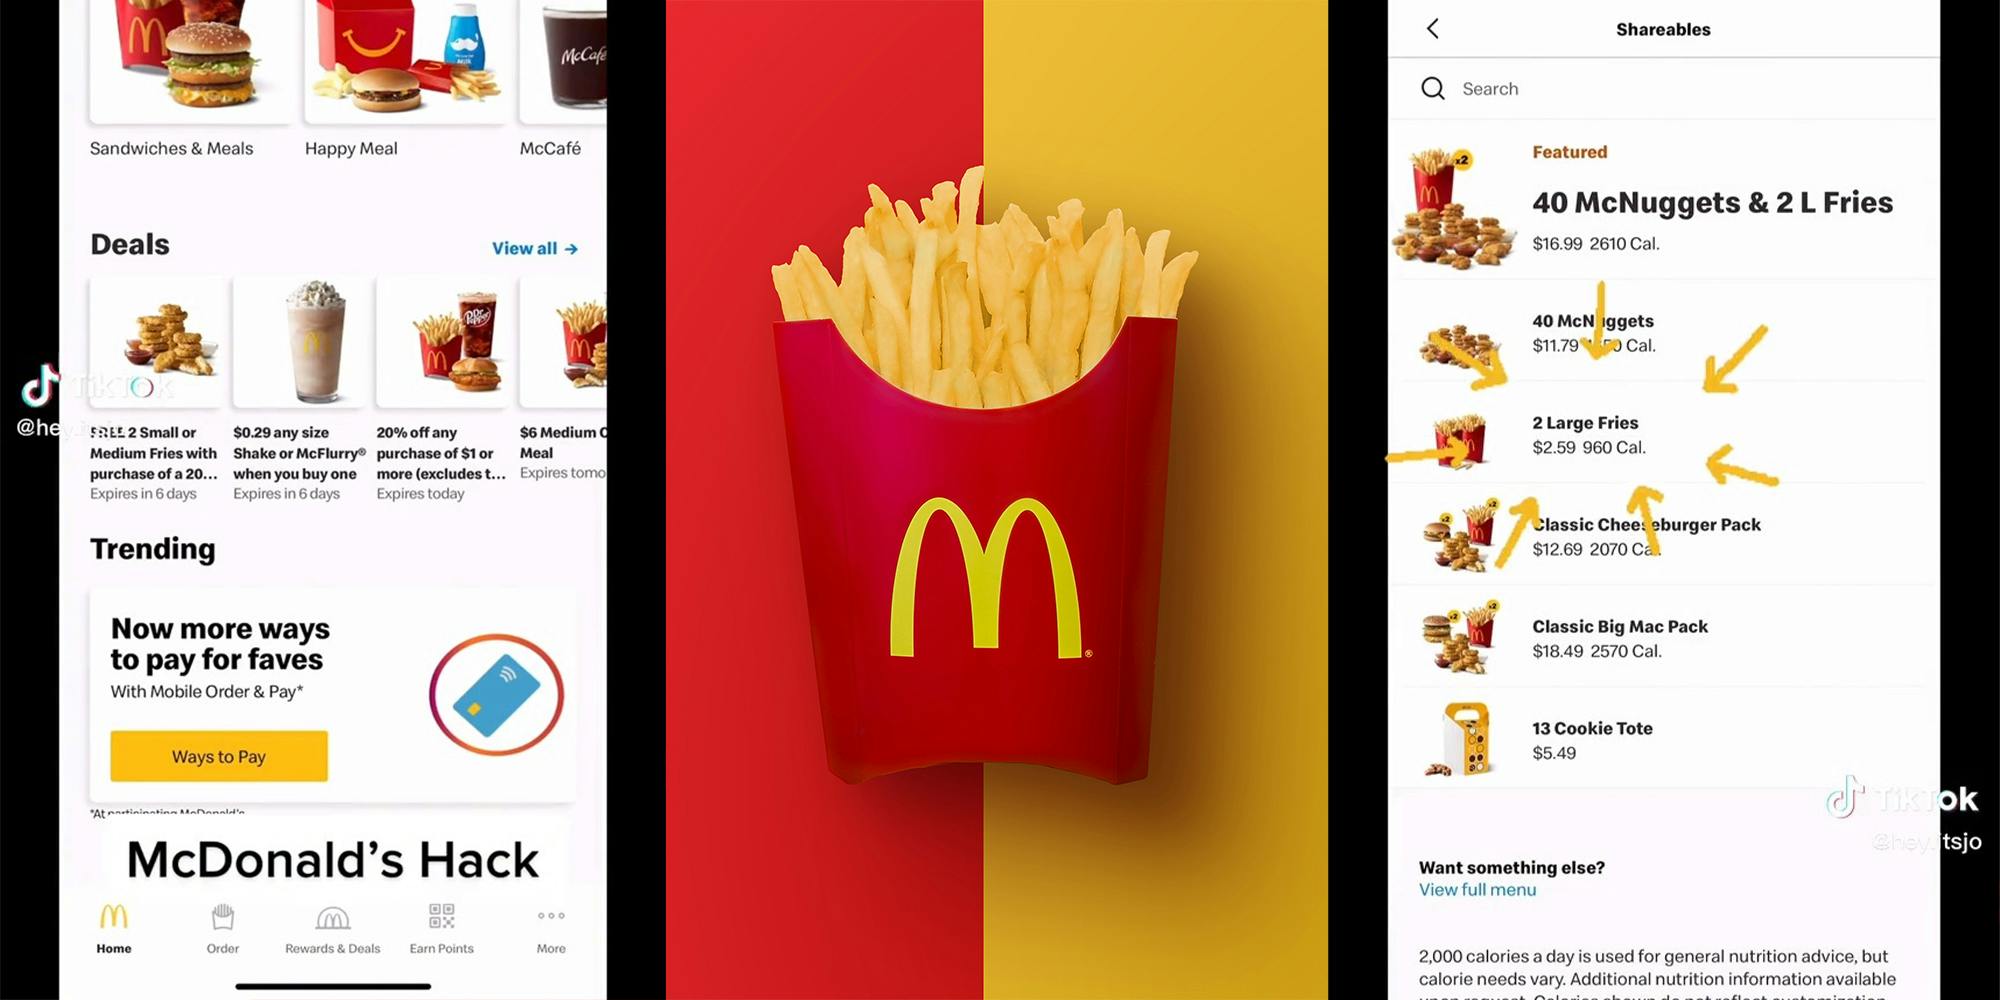 Customer shares how to get two large fries for under $3, McDonalds Fries Hack